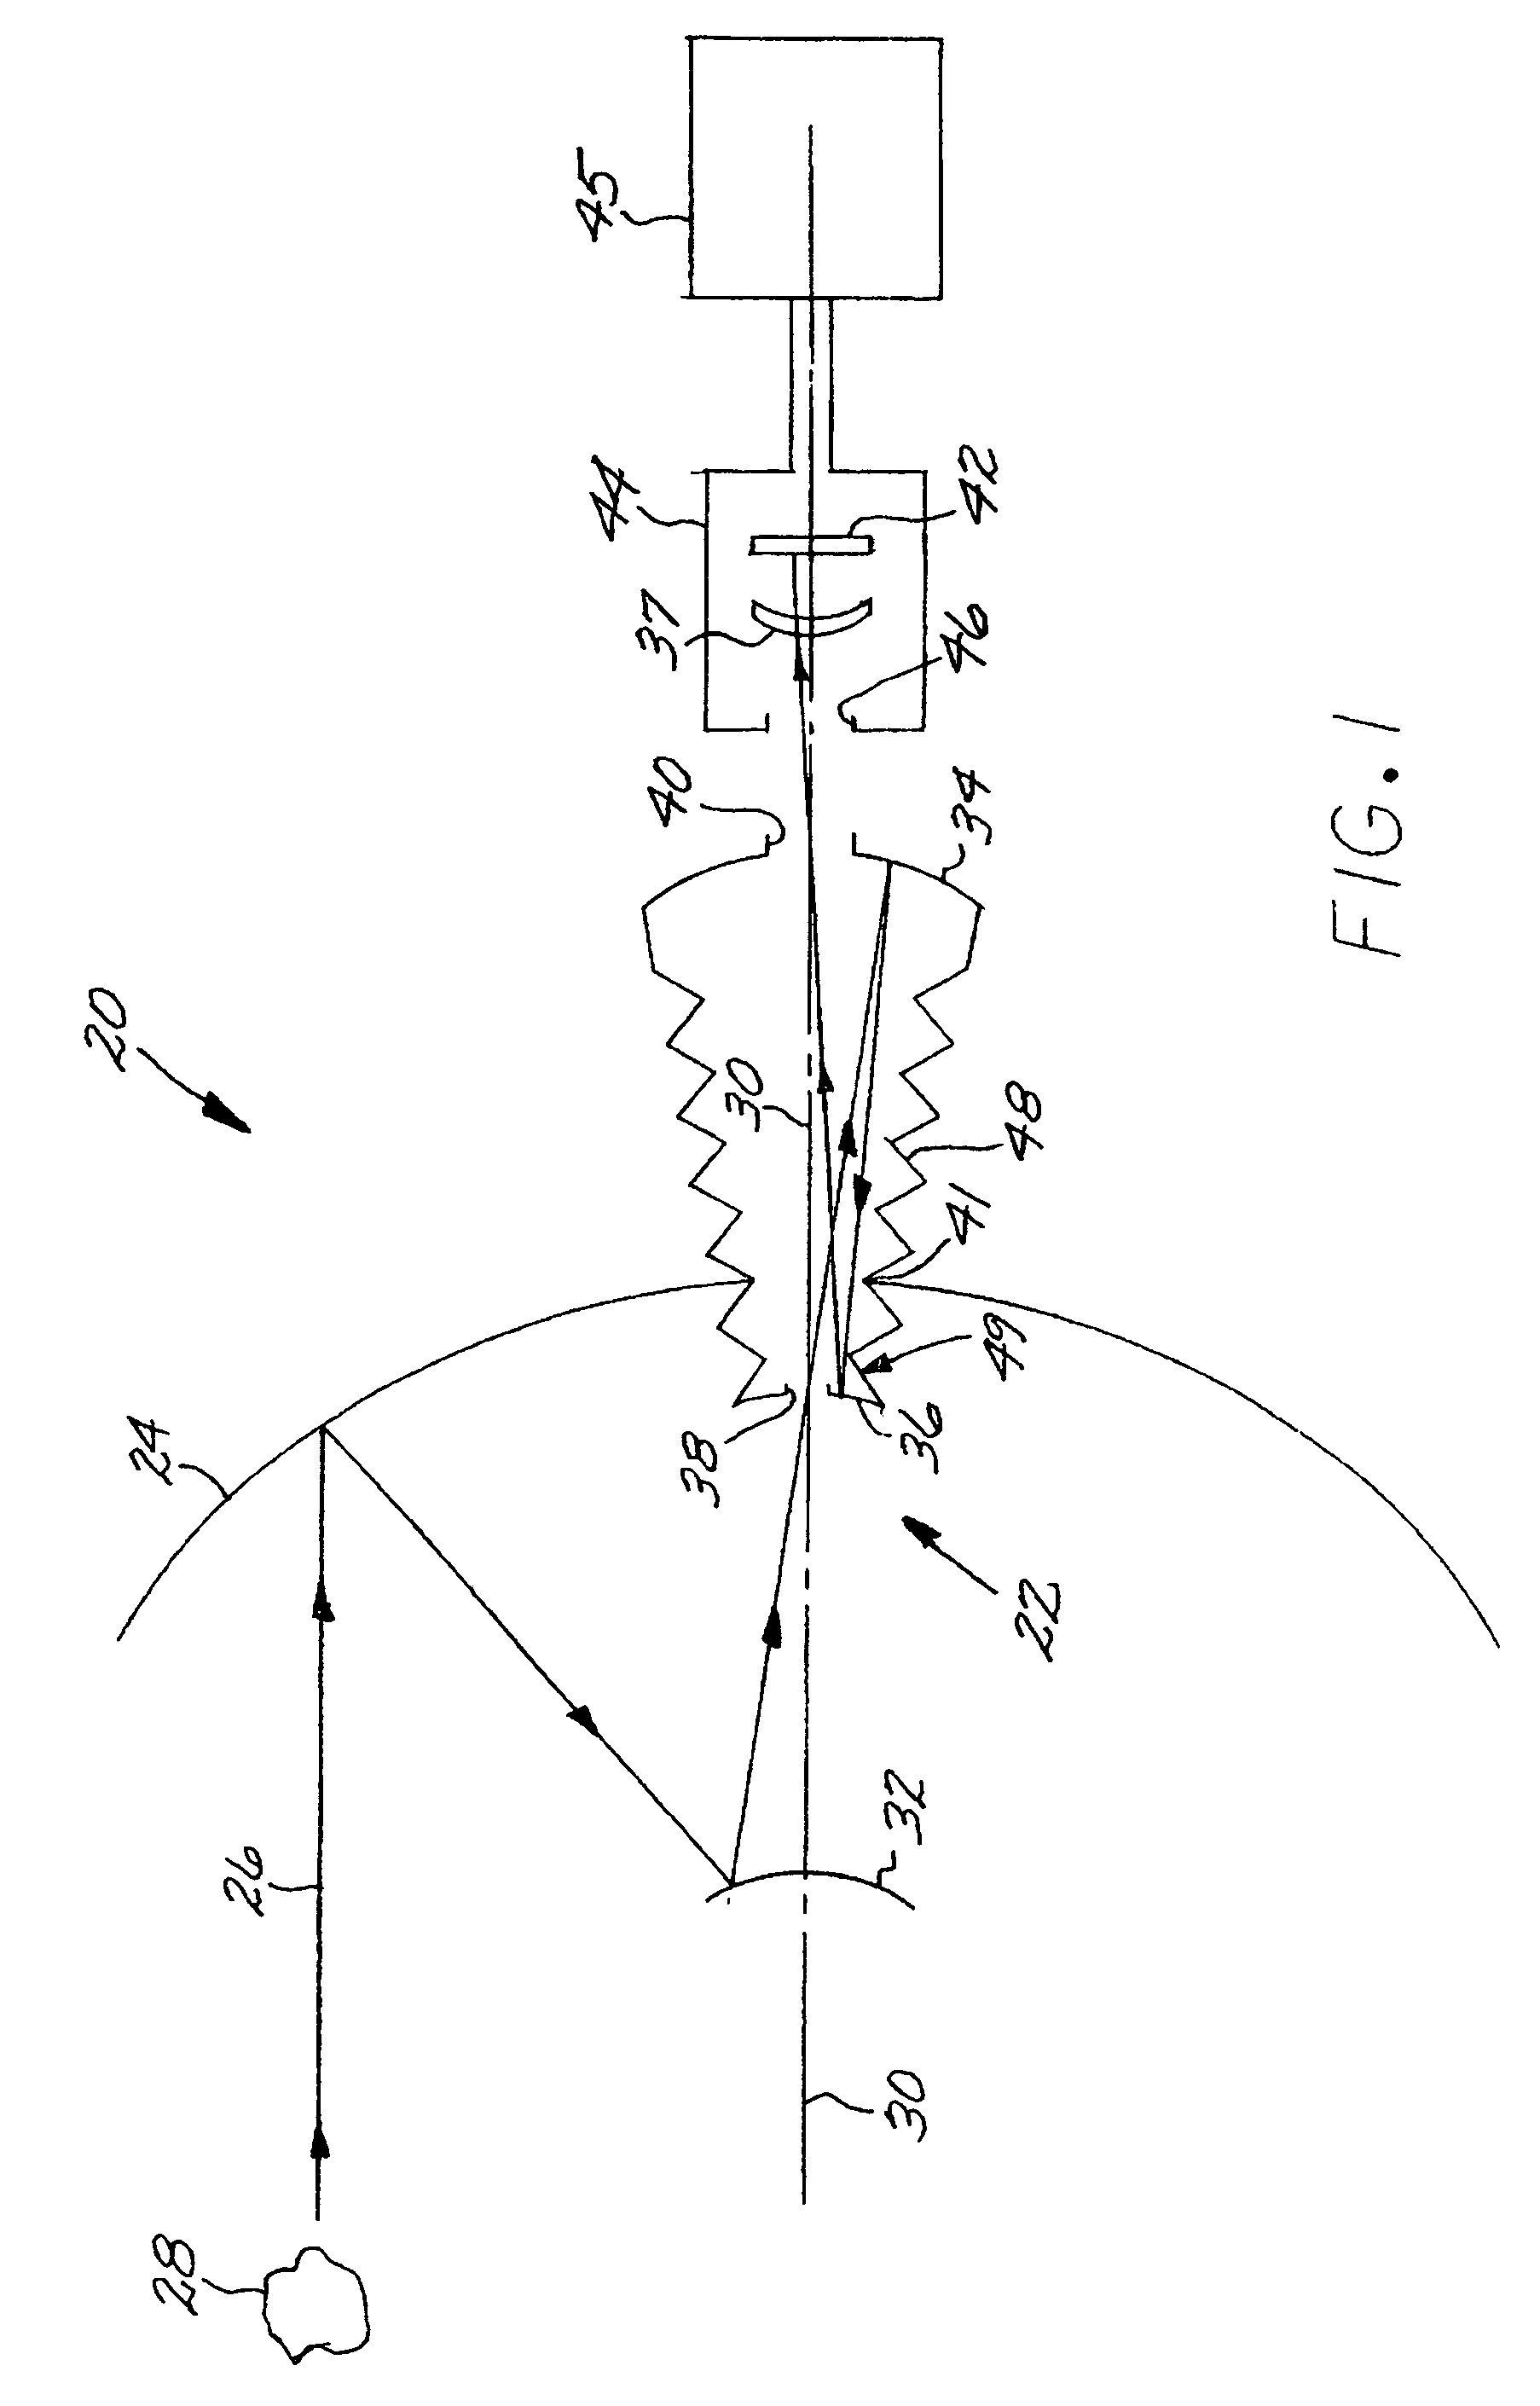 Imaging optical system including a telescope and an uncooled warm-stop structure